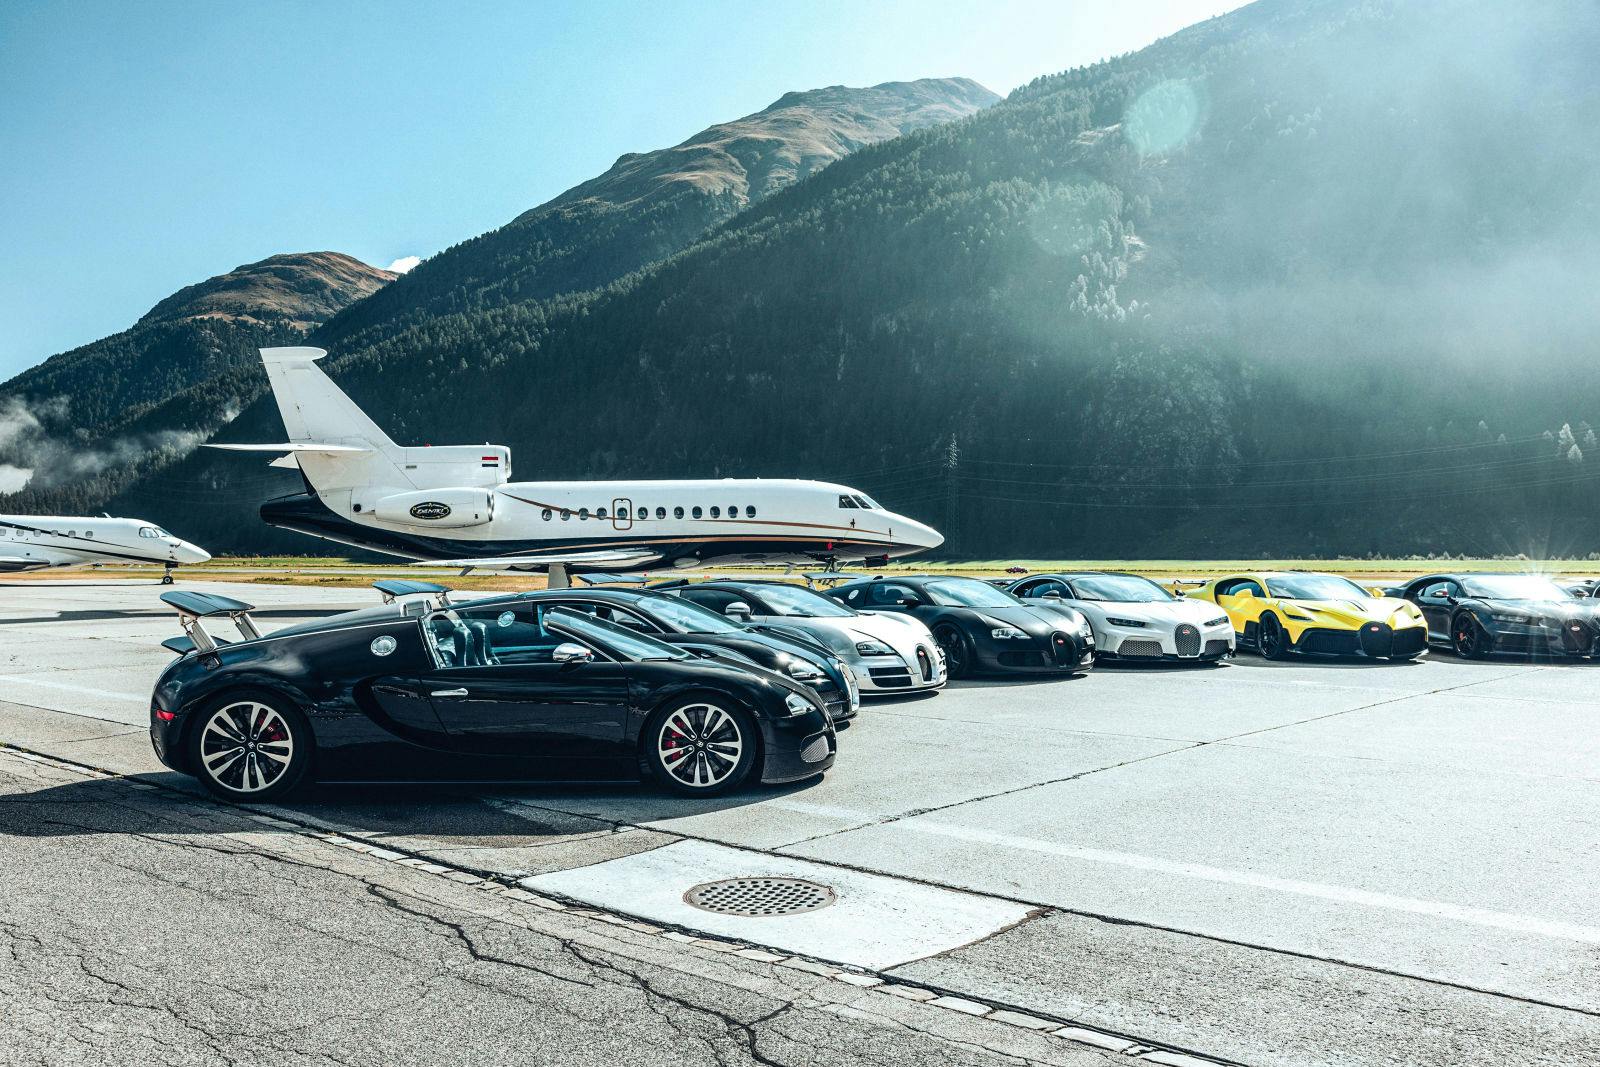 Bugatti legends line up at the spectacular Samedan airport for the ultimate display of speed.